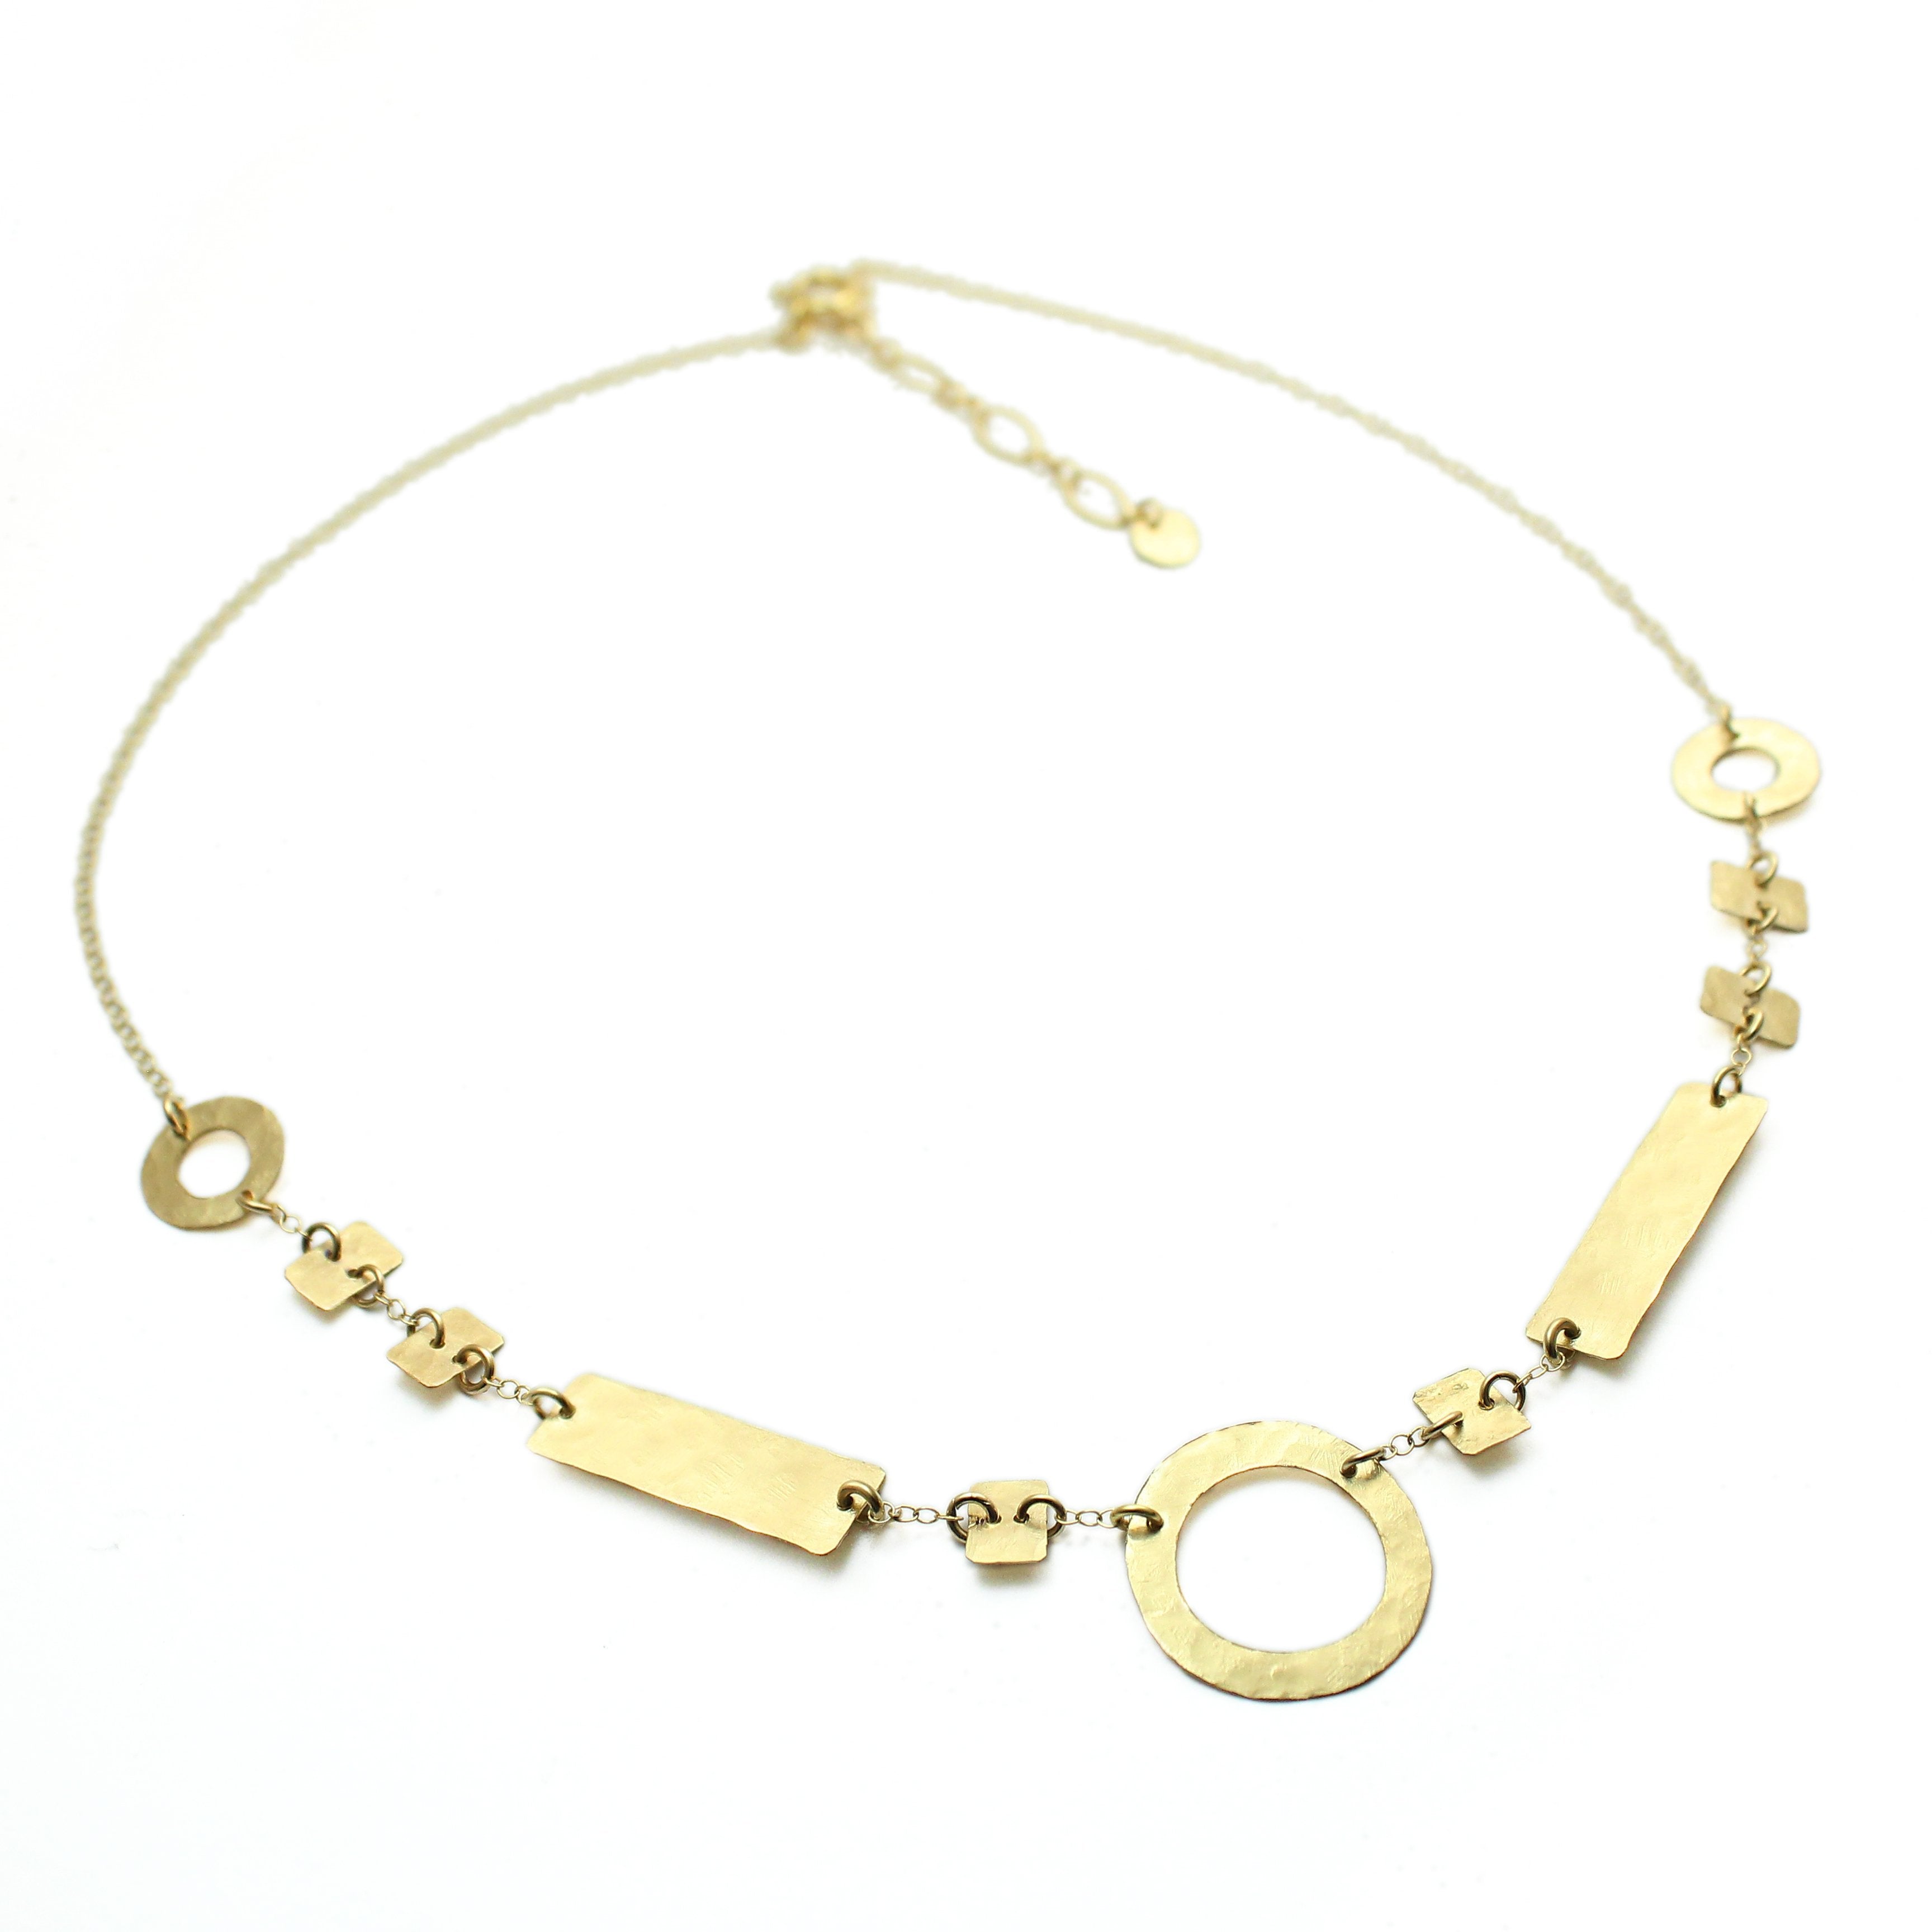 Ancient Egyptian Necklace (Gold filled/Silver) - Shulamit Kanter